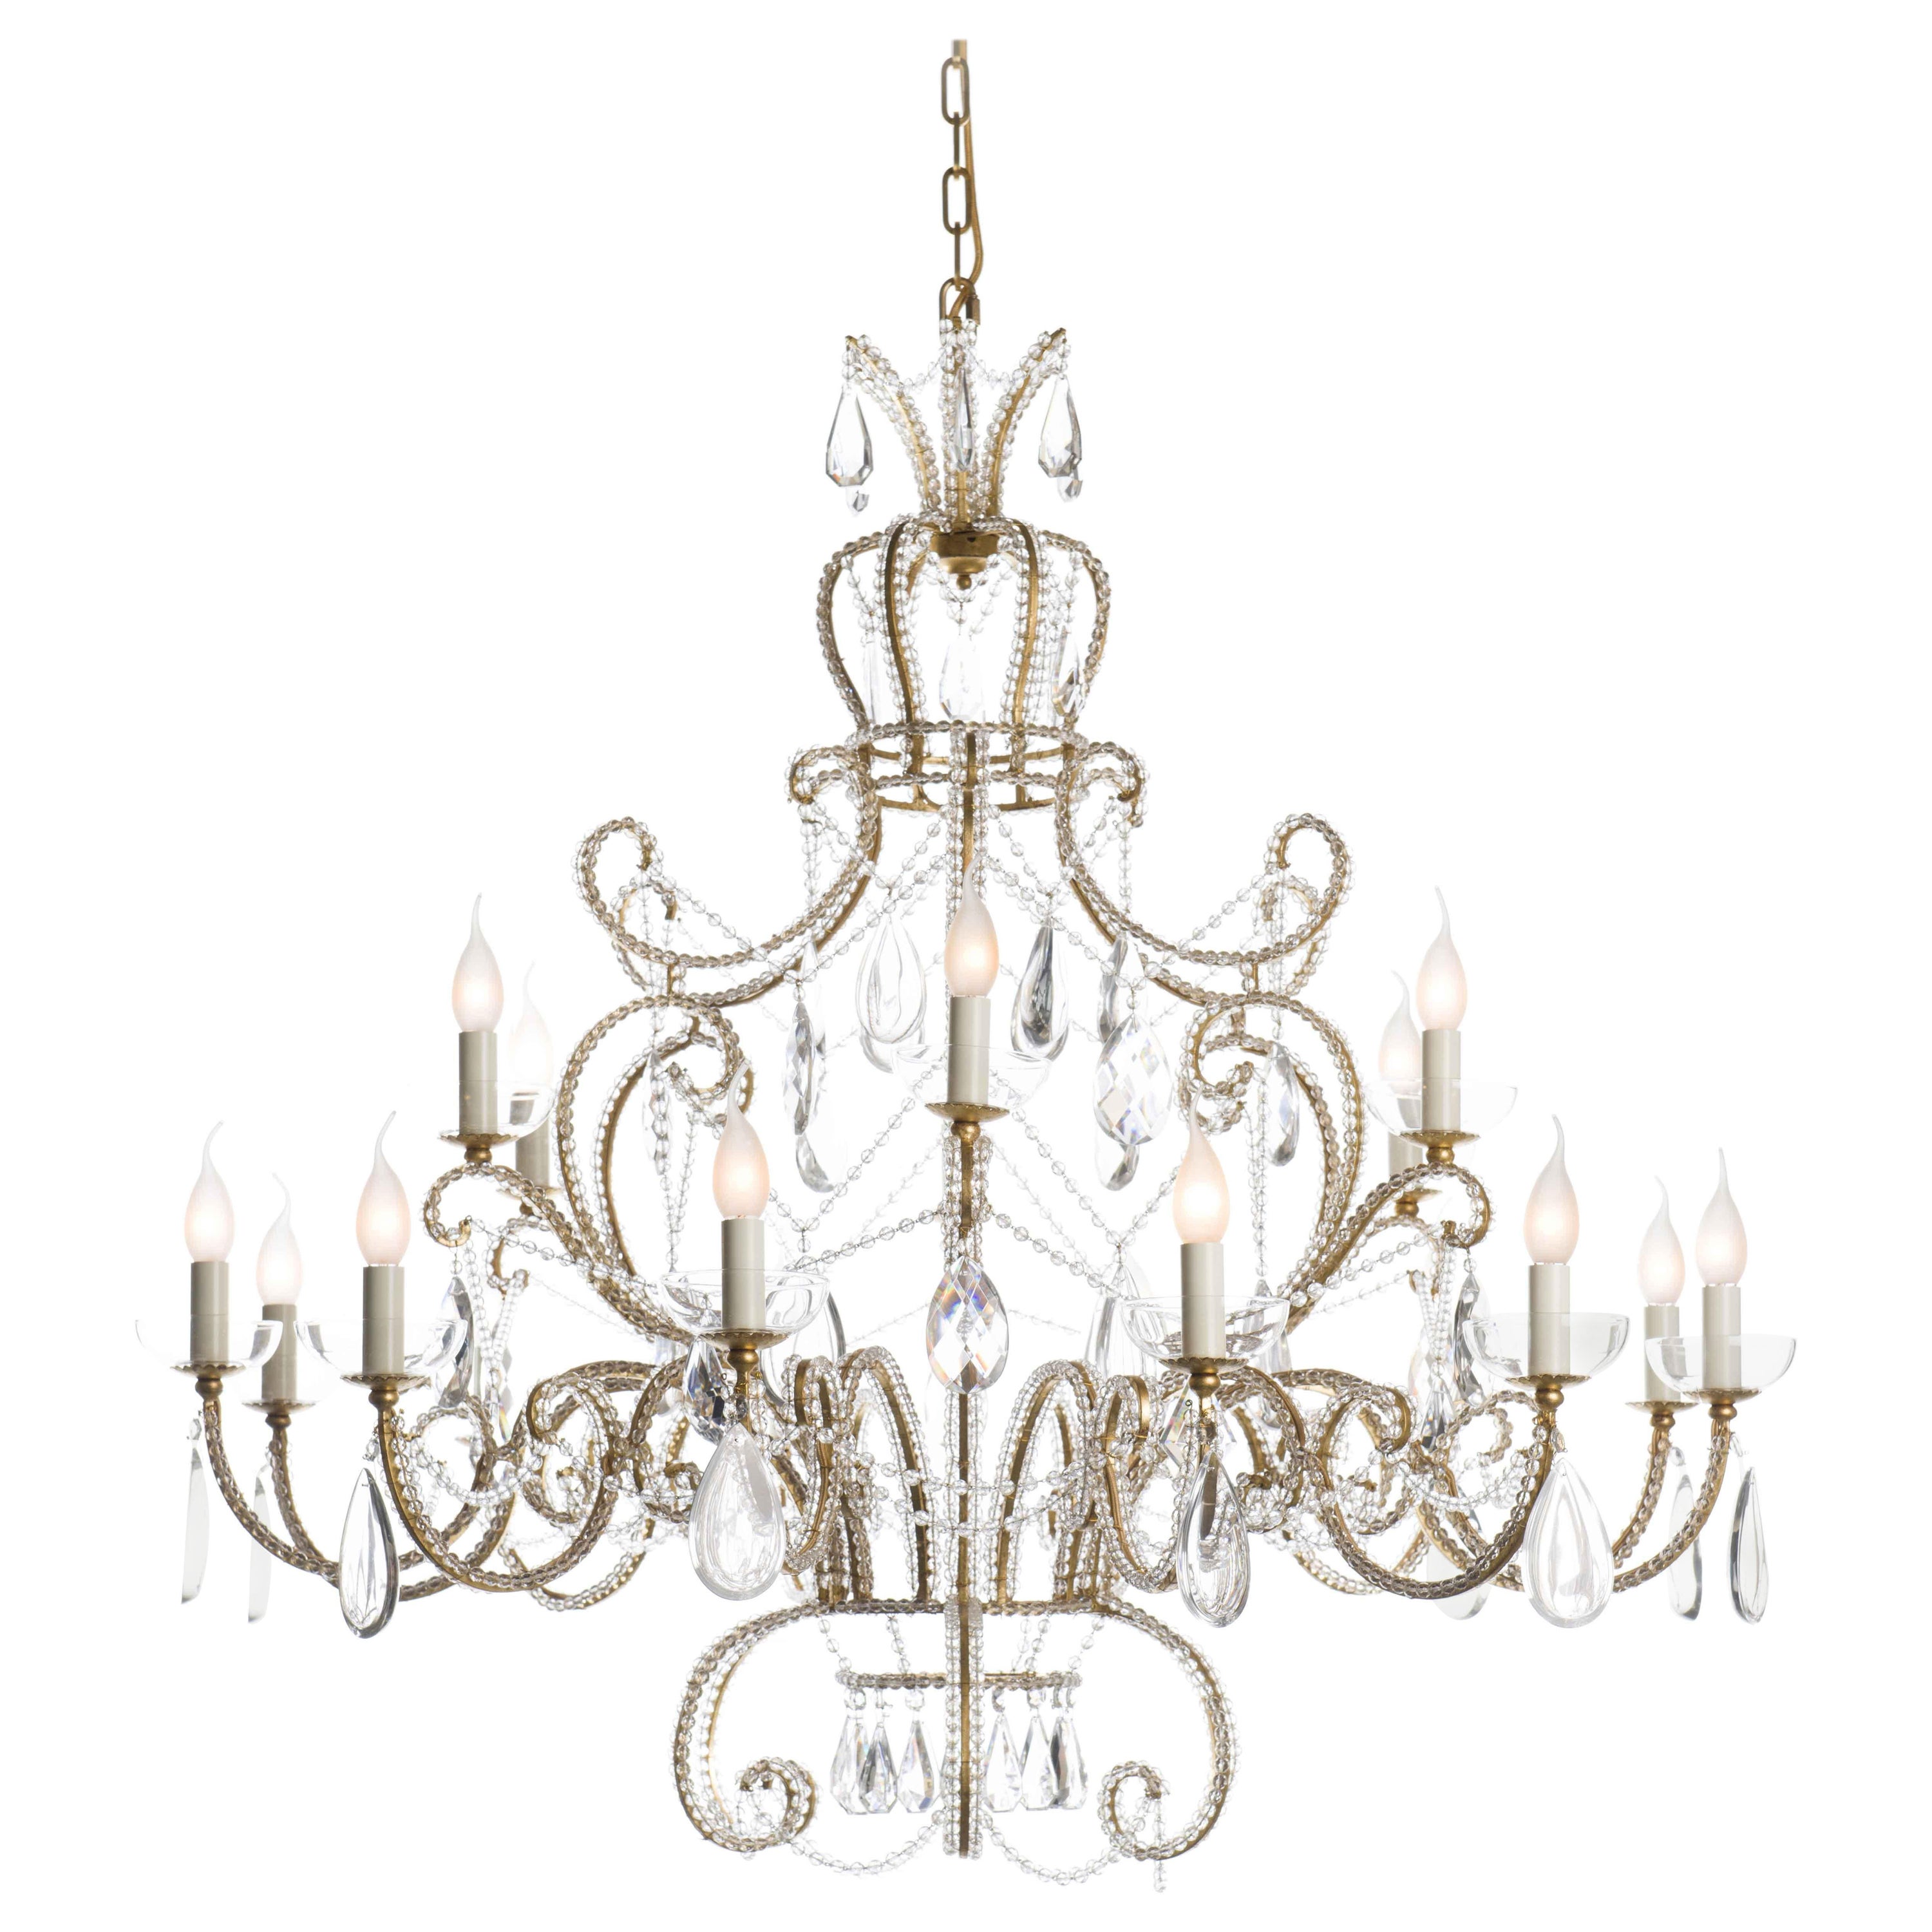 Certified Maison Bagues Chandelier, 18 Lights Iron & Crystal #18132